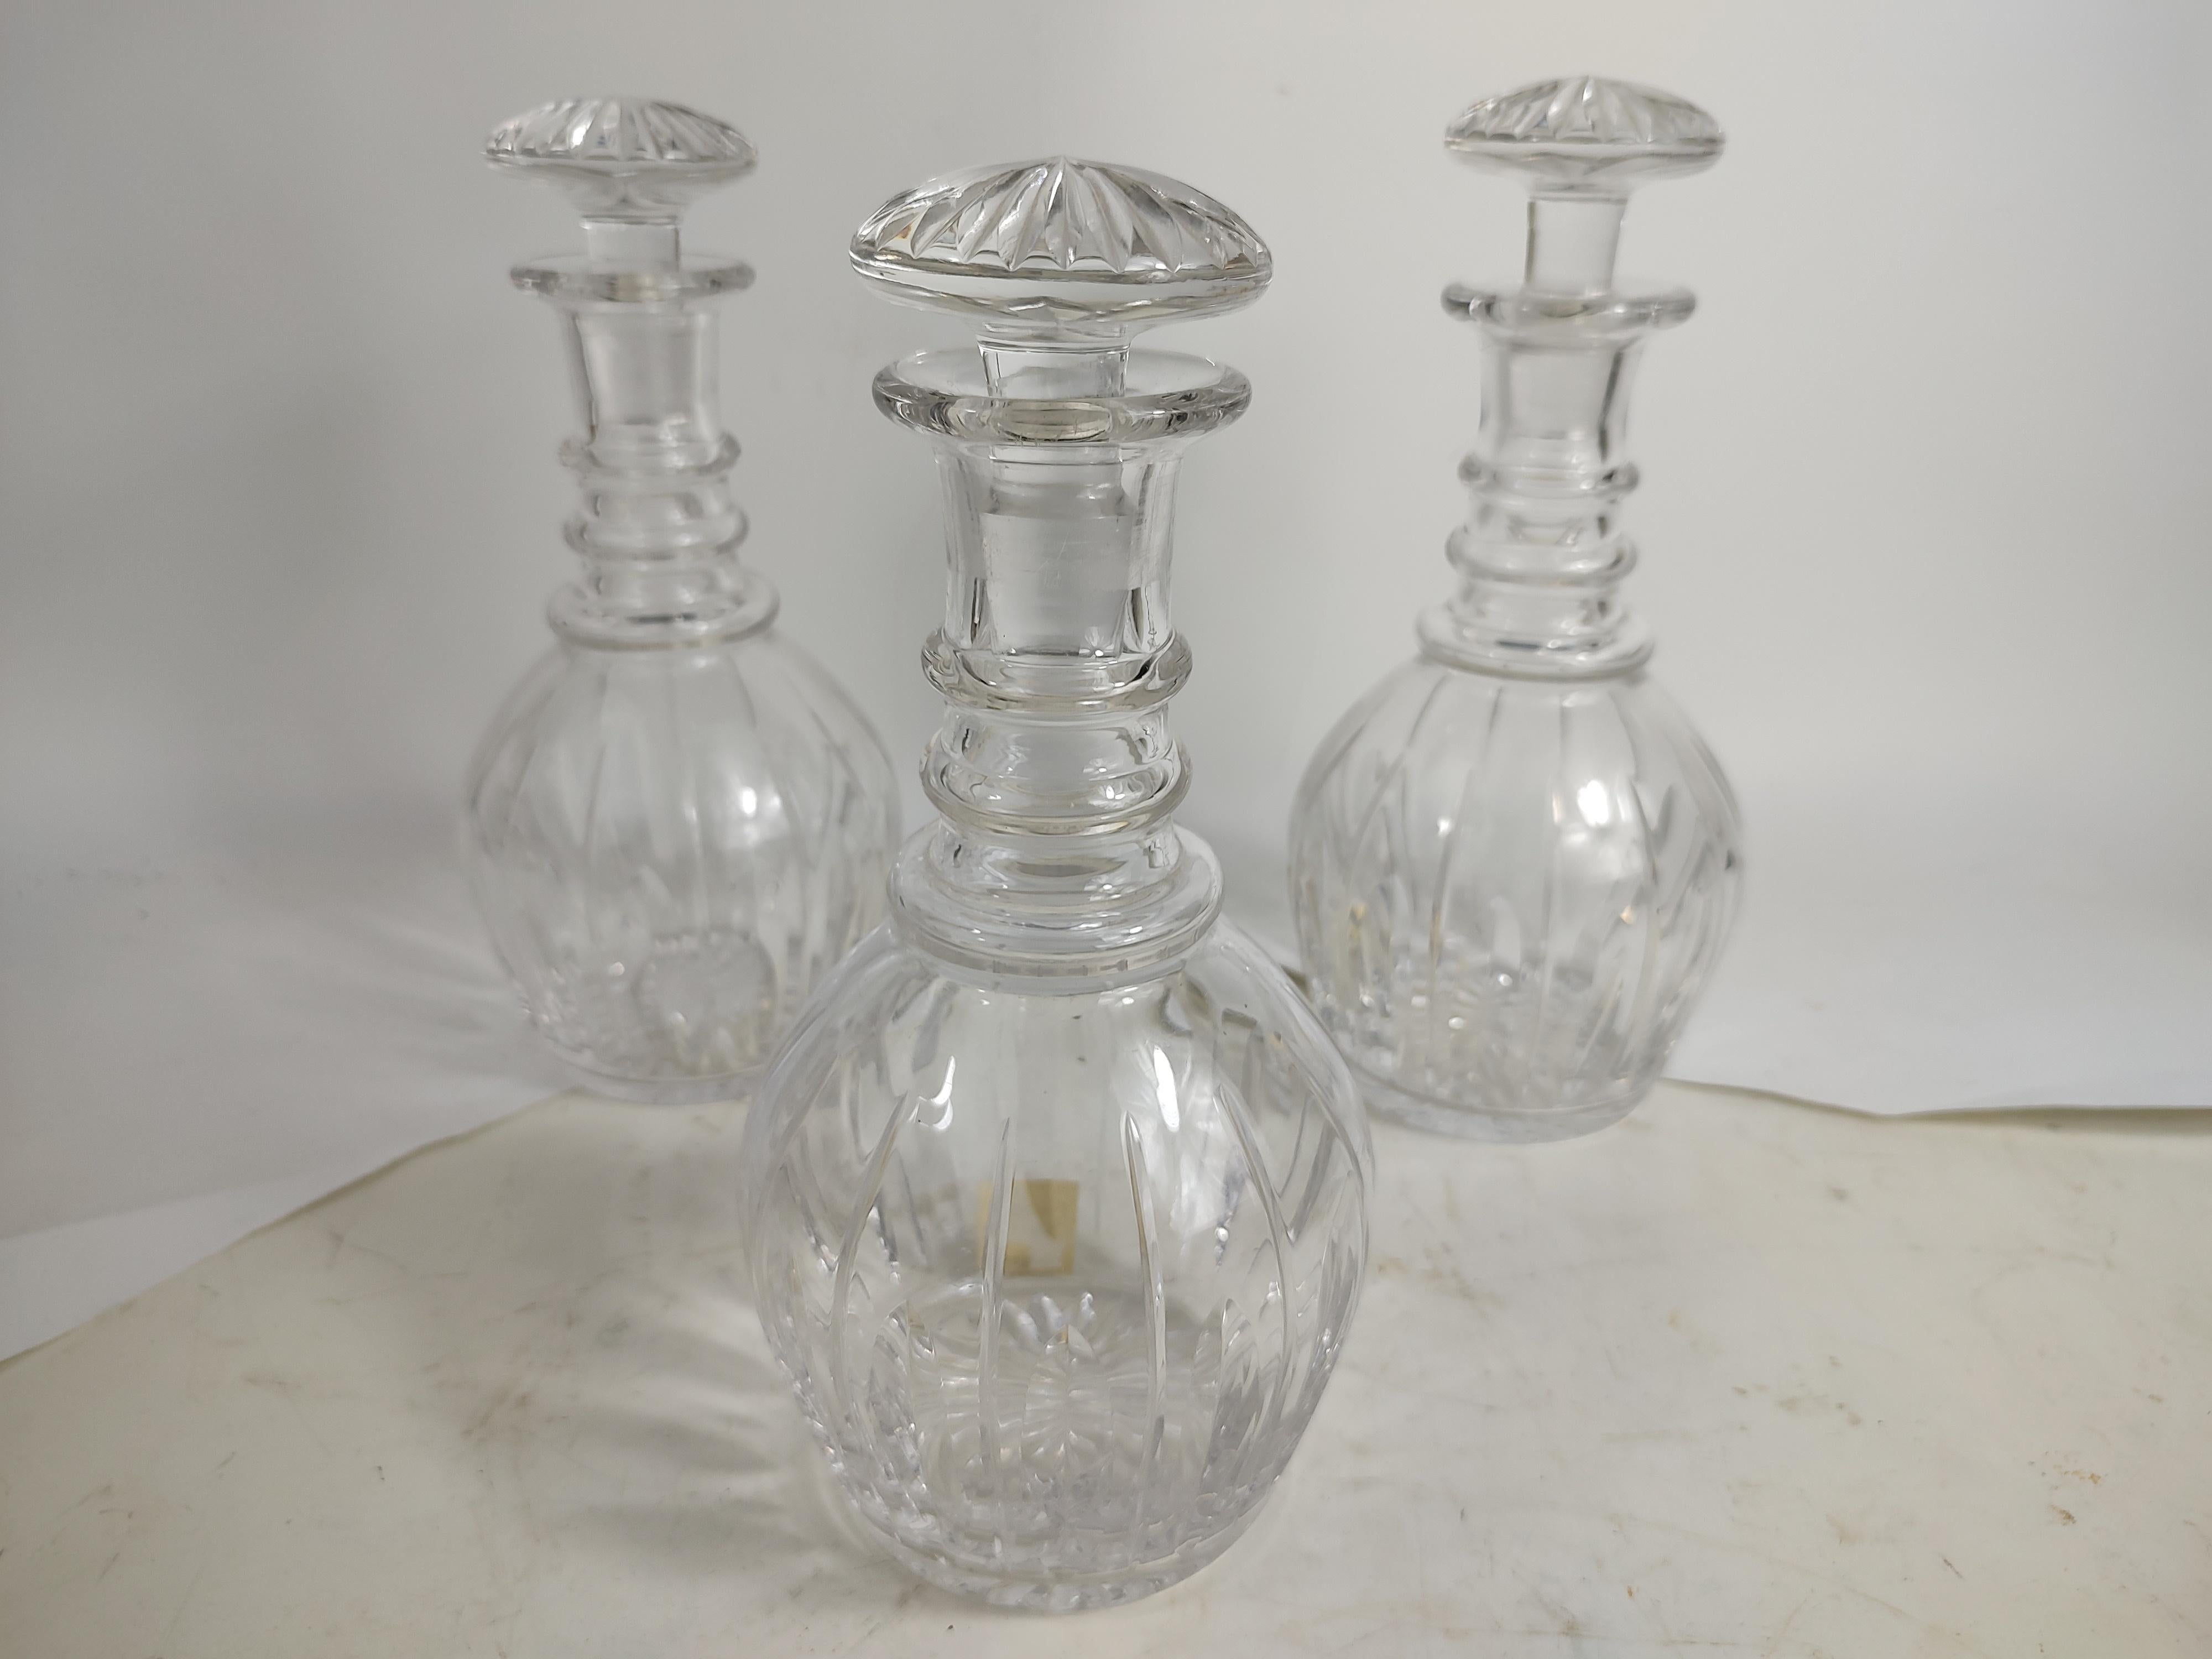 Exquisite set of 3 cut glass crystal decanter bottles by the Stuart Glass Co. of England c1940. In excellent vintage condition with minimal wear. Bottles are signed on base and two have Christie's Auction house stickers from 2007. No chips or loses.